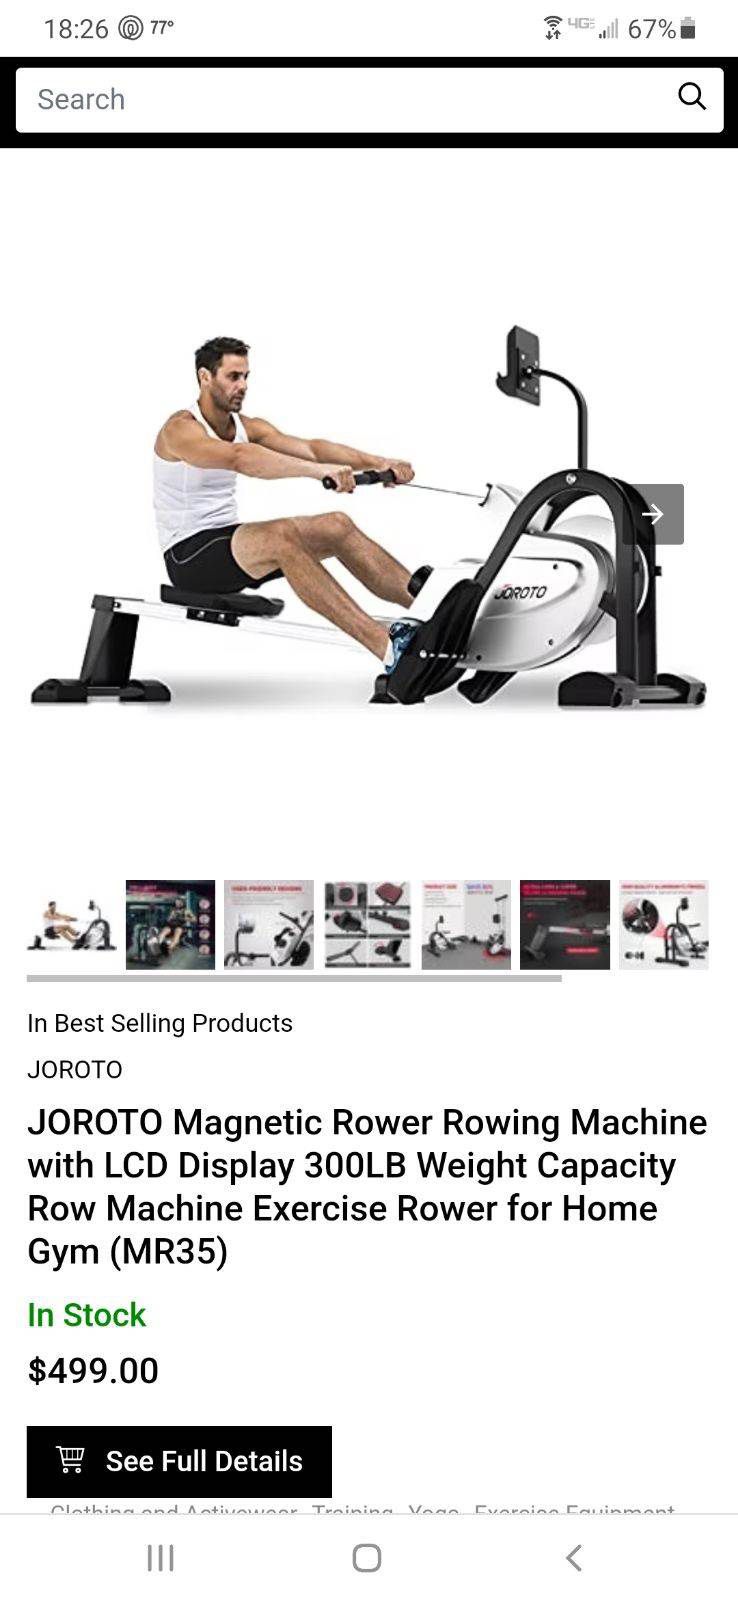 JOROTO Magnetic Rower Rowing Machine with LCD Display $300 OBO